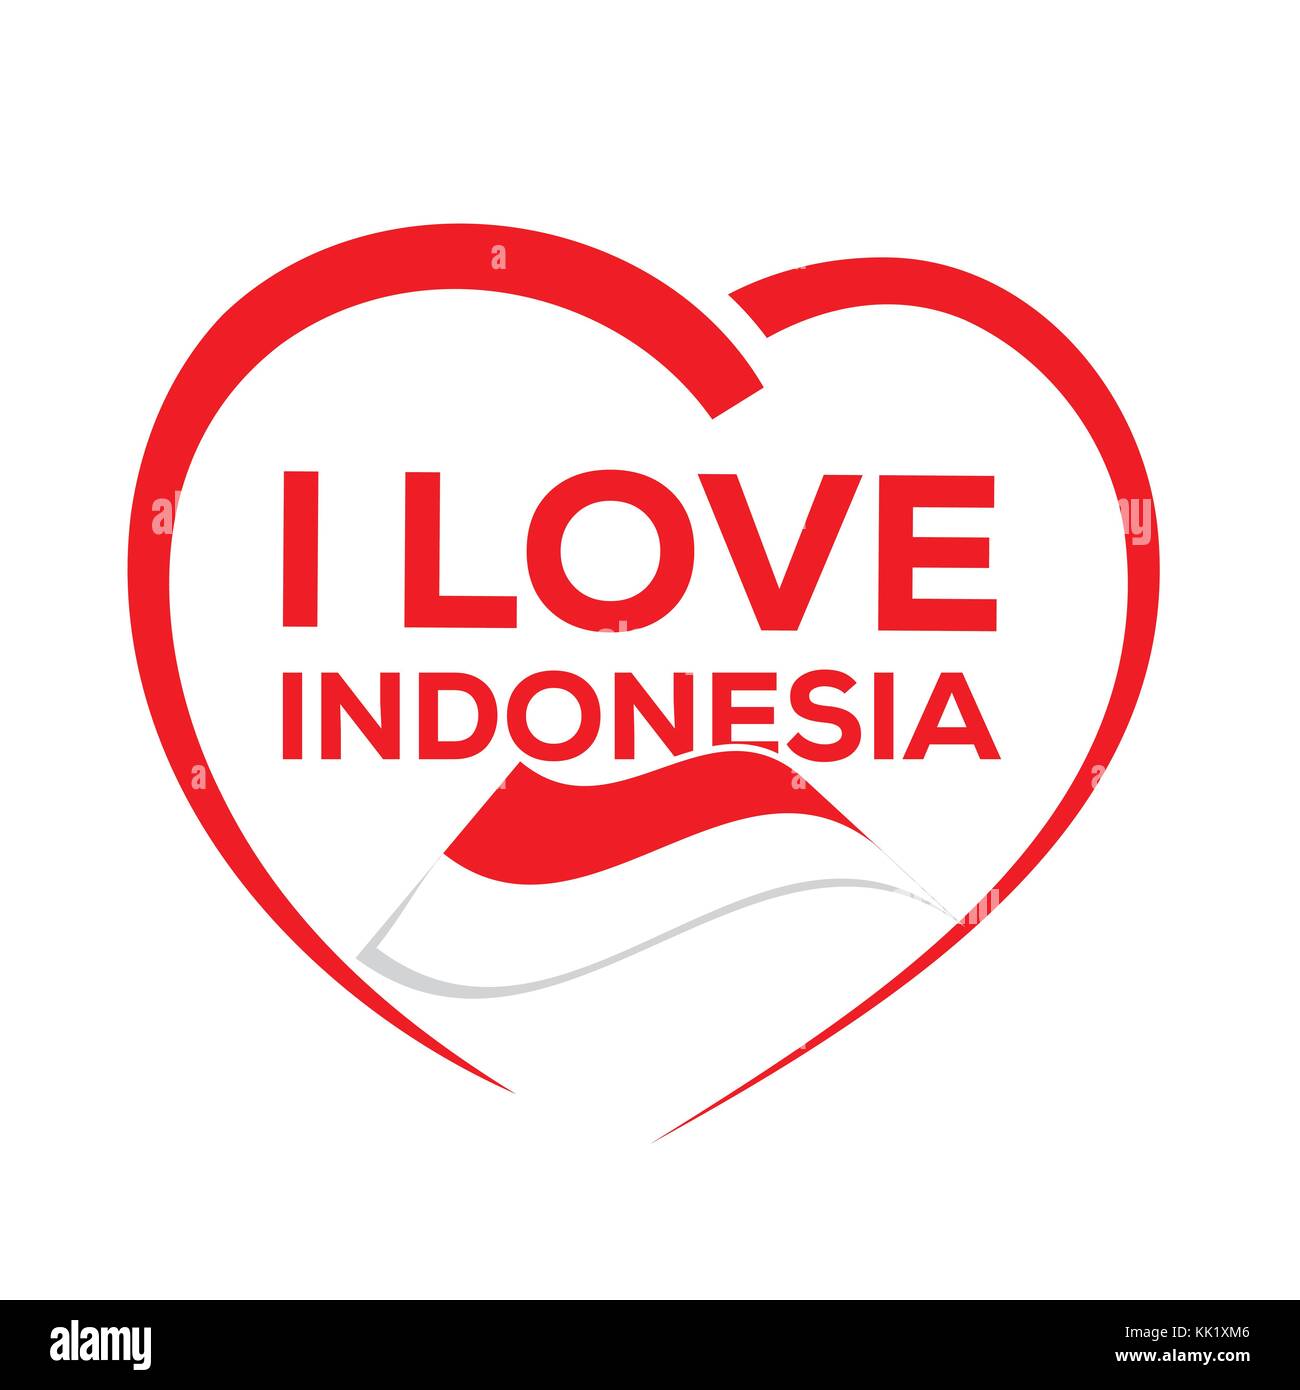 I love indonesia with outline of heart and indonesian flag, icon design, isolated on white background. Stock Vector